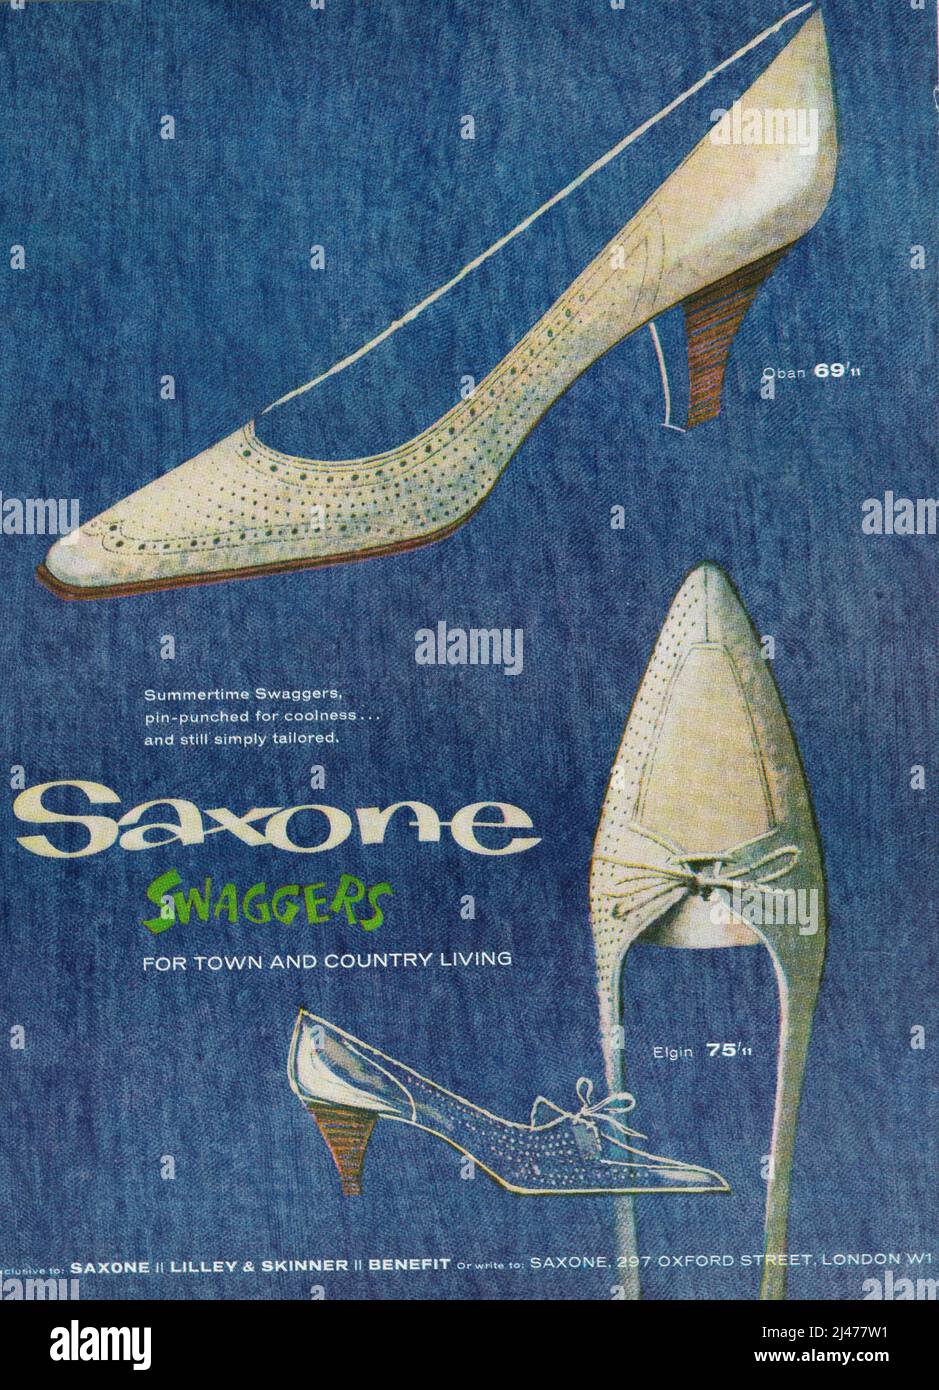 Saxone Swaggers vintage paper advert advert Summertime Swaggers scarpe bianche Foto Stock